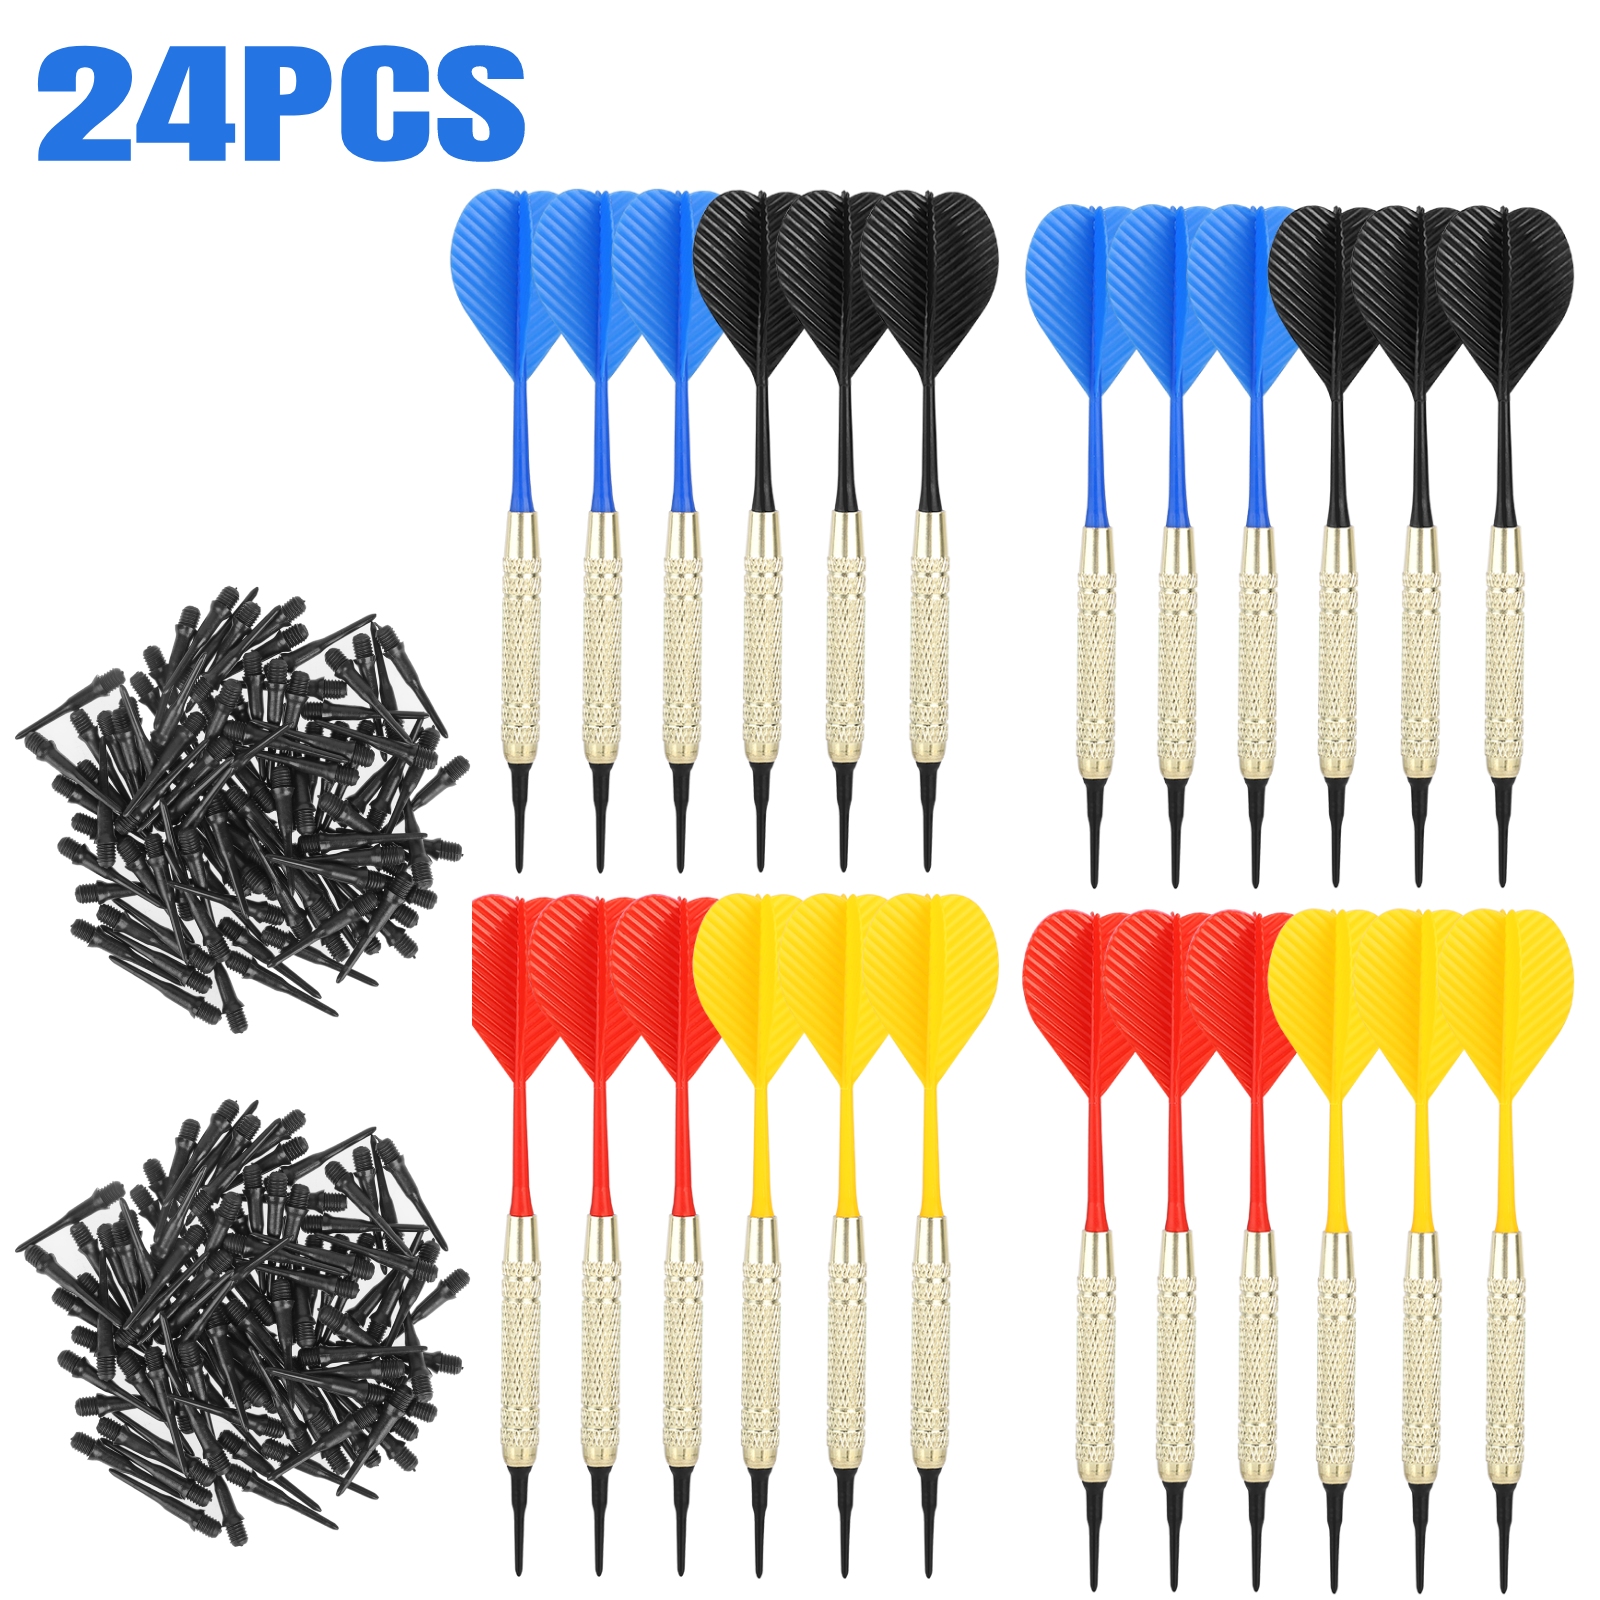 100 for 1 price Dart Pro plastic soft tip replacement dart tips FREE SHIPPING 